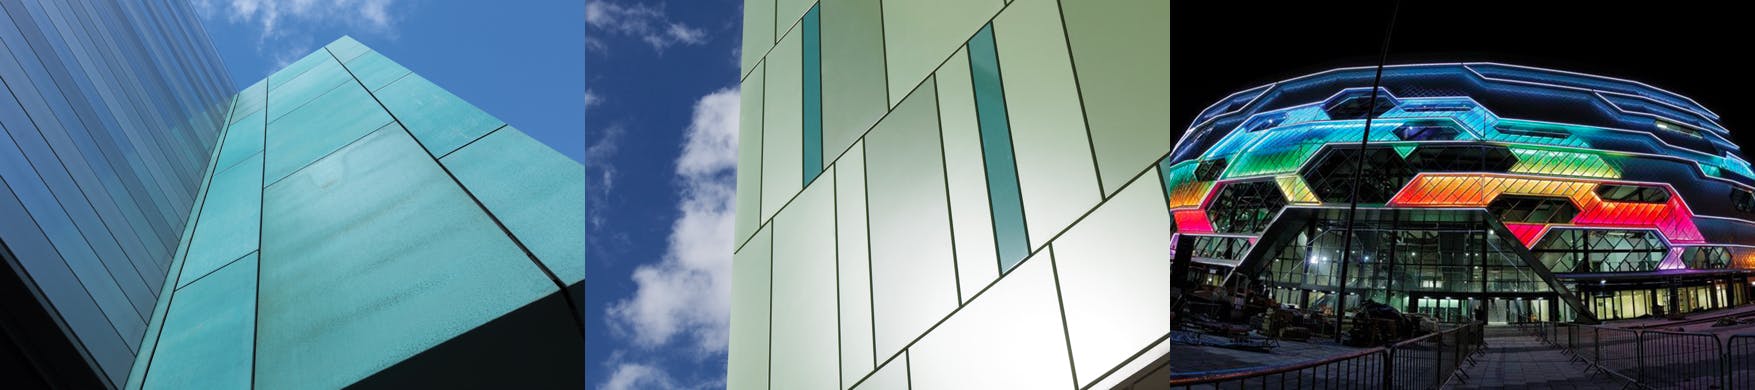 Three images of building with outside cladding